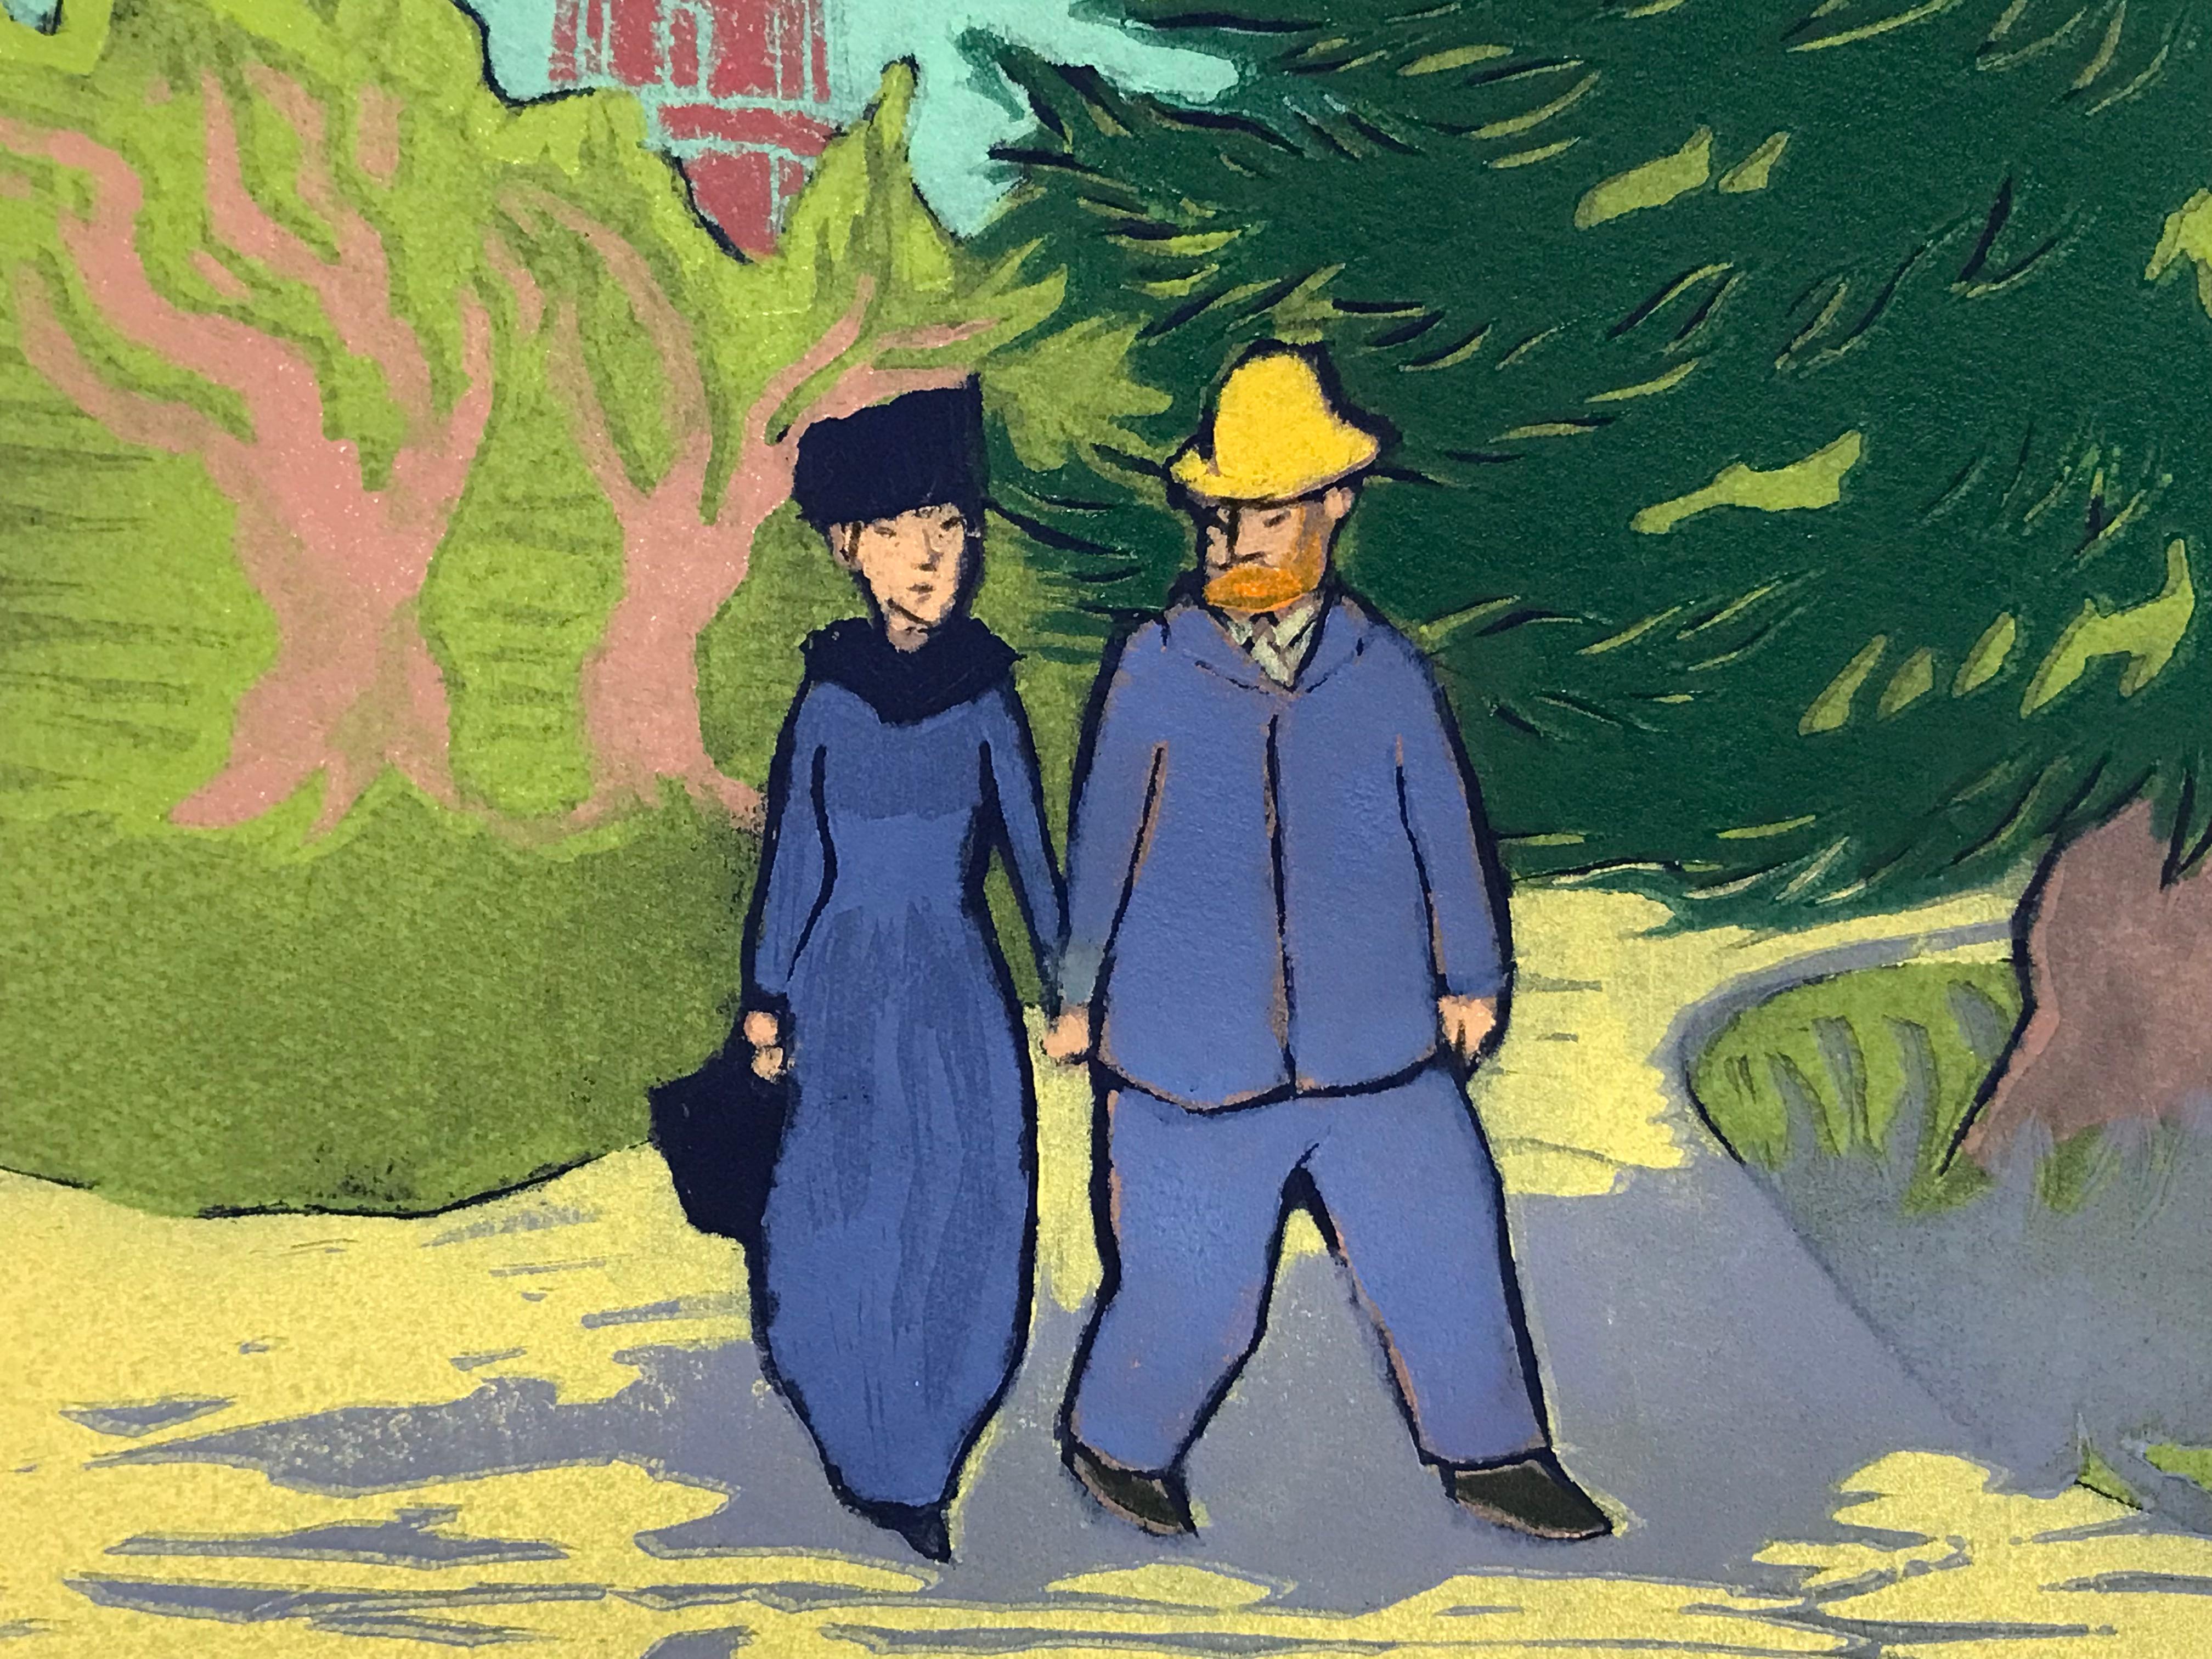 A limited edition woodcut on paper print by Mychael Barratt of Vincent Van Gogh with a lady on a walk in london, passing a grand tree and Great Pagoda. The print is compromised of blue, green, purple, pink and yellow tones

Additional